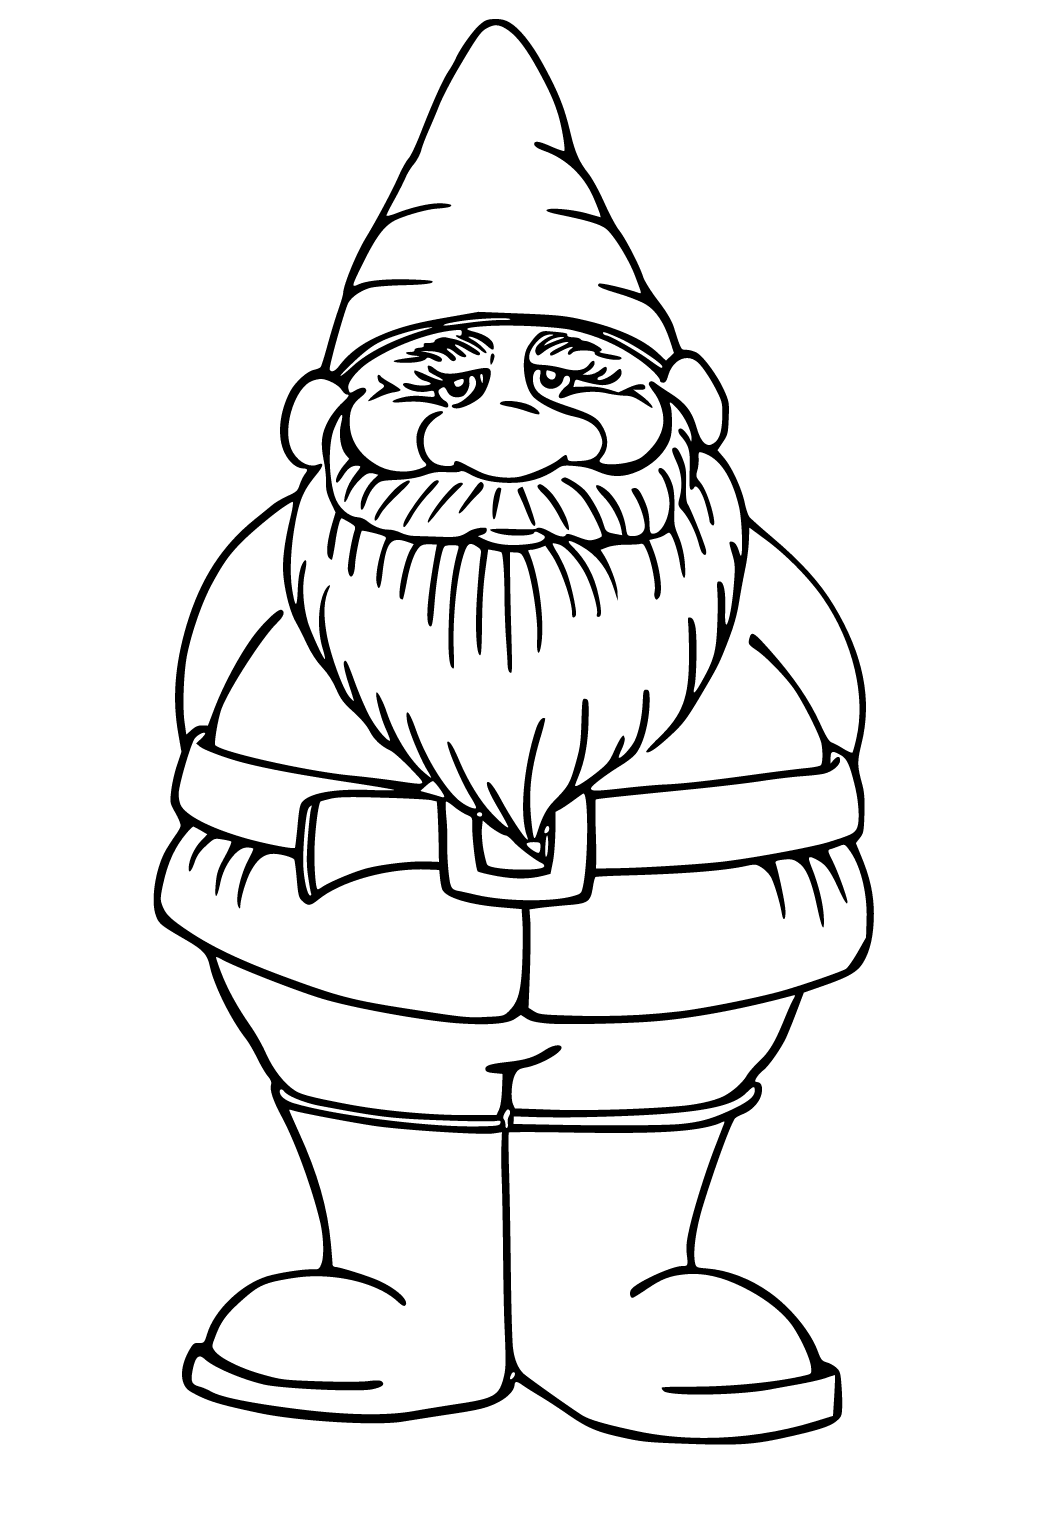 Free Printable Gnome Real Coloring Page for Adults and Kids - Lystok.com